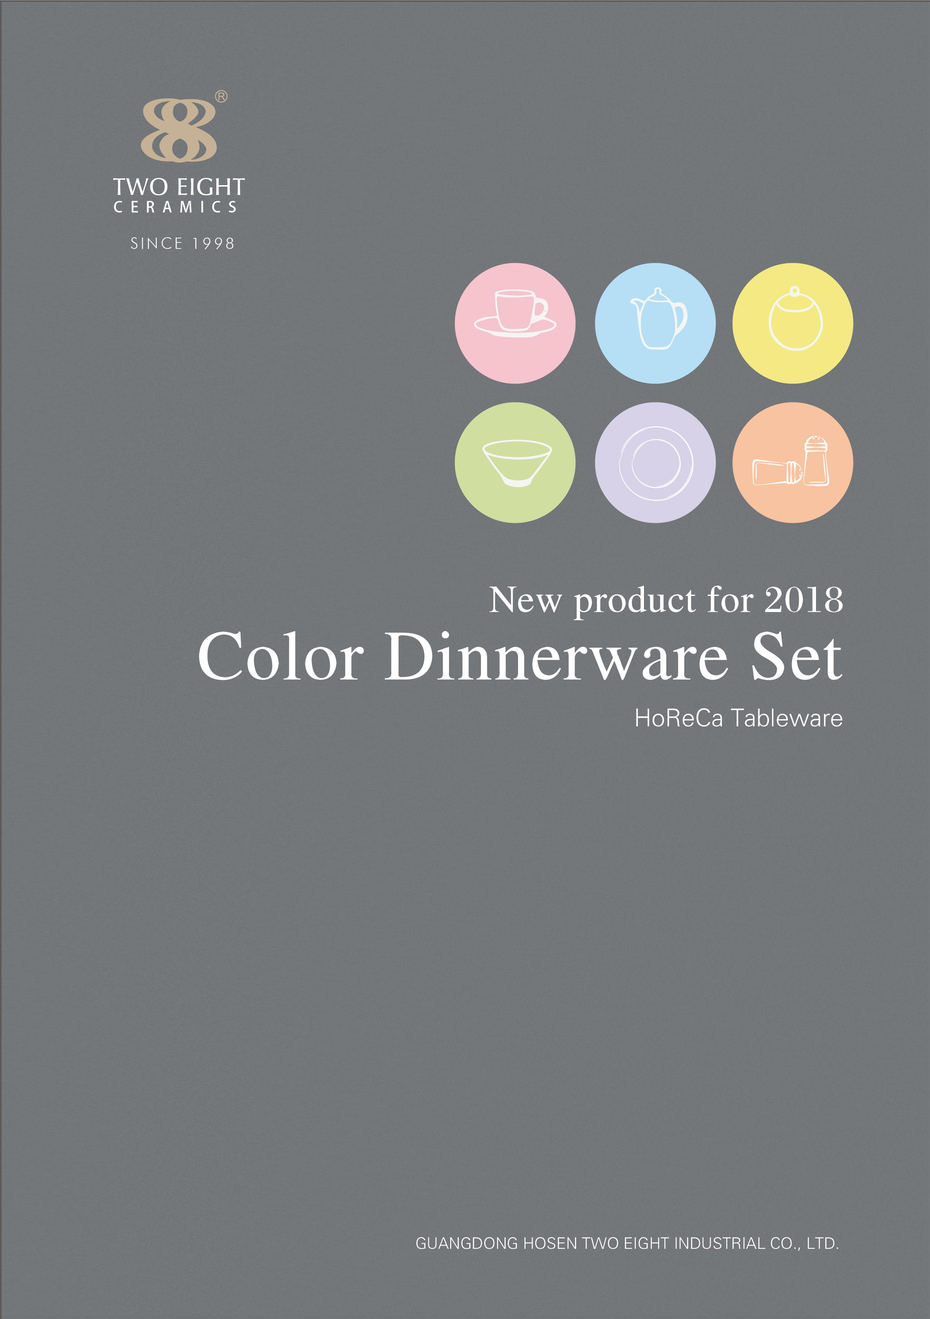 New product for 2018-Color Dinnerware Set